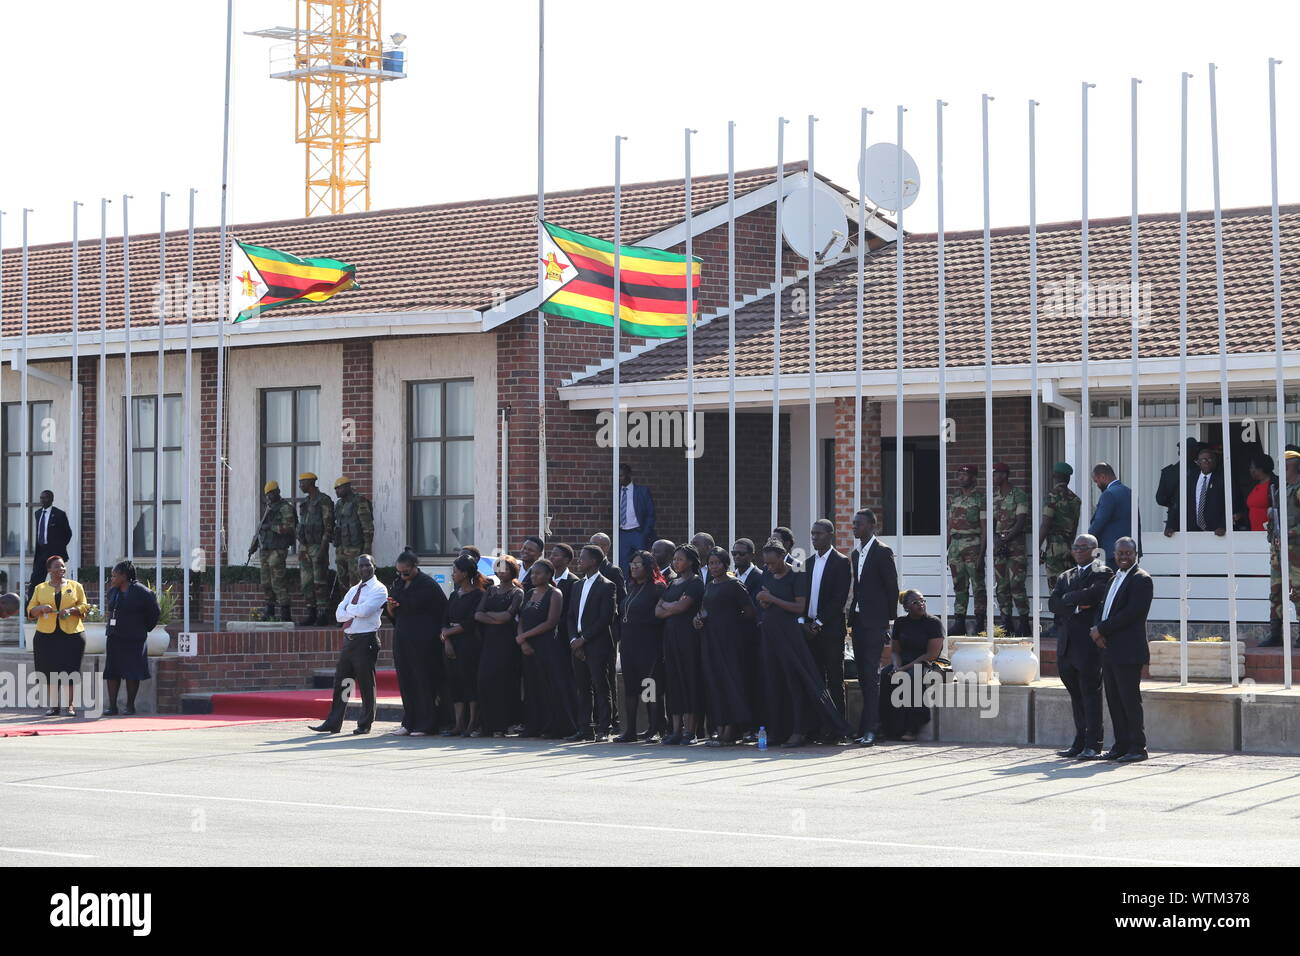 Harare, Zimbabwe. 11th Sep, 2019. Zimbabweans receive the body of the late former Zimbabwean President Robert Mugabe at the Robert Gabriel Mugabe International Airport in Harare, Zimbabwe, on Sept. 11, 2019. The body of the late former Zimbabwean President Robert Mugabe, who died in Singapore last Friday aged 95, arrived in the country on Wednesday afternoon ahead of his burial planned for Sunday. Credit: Chen Yaqin/Xinhua Stock Photo